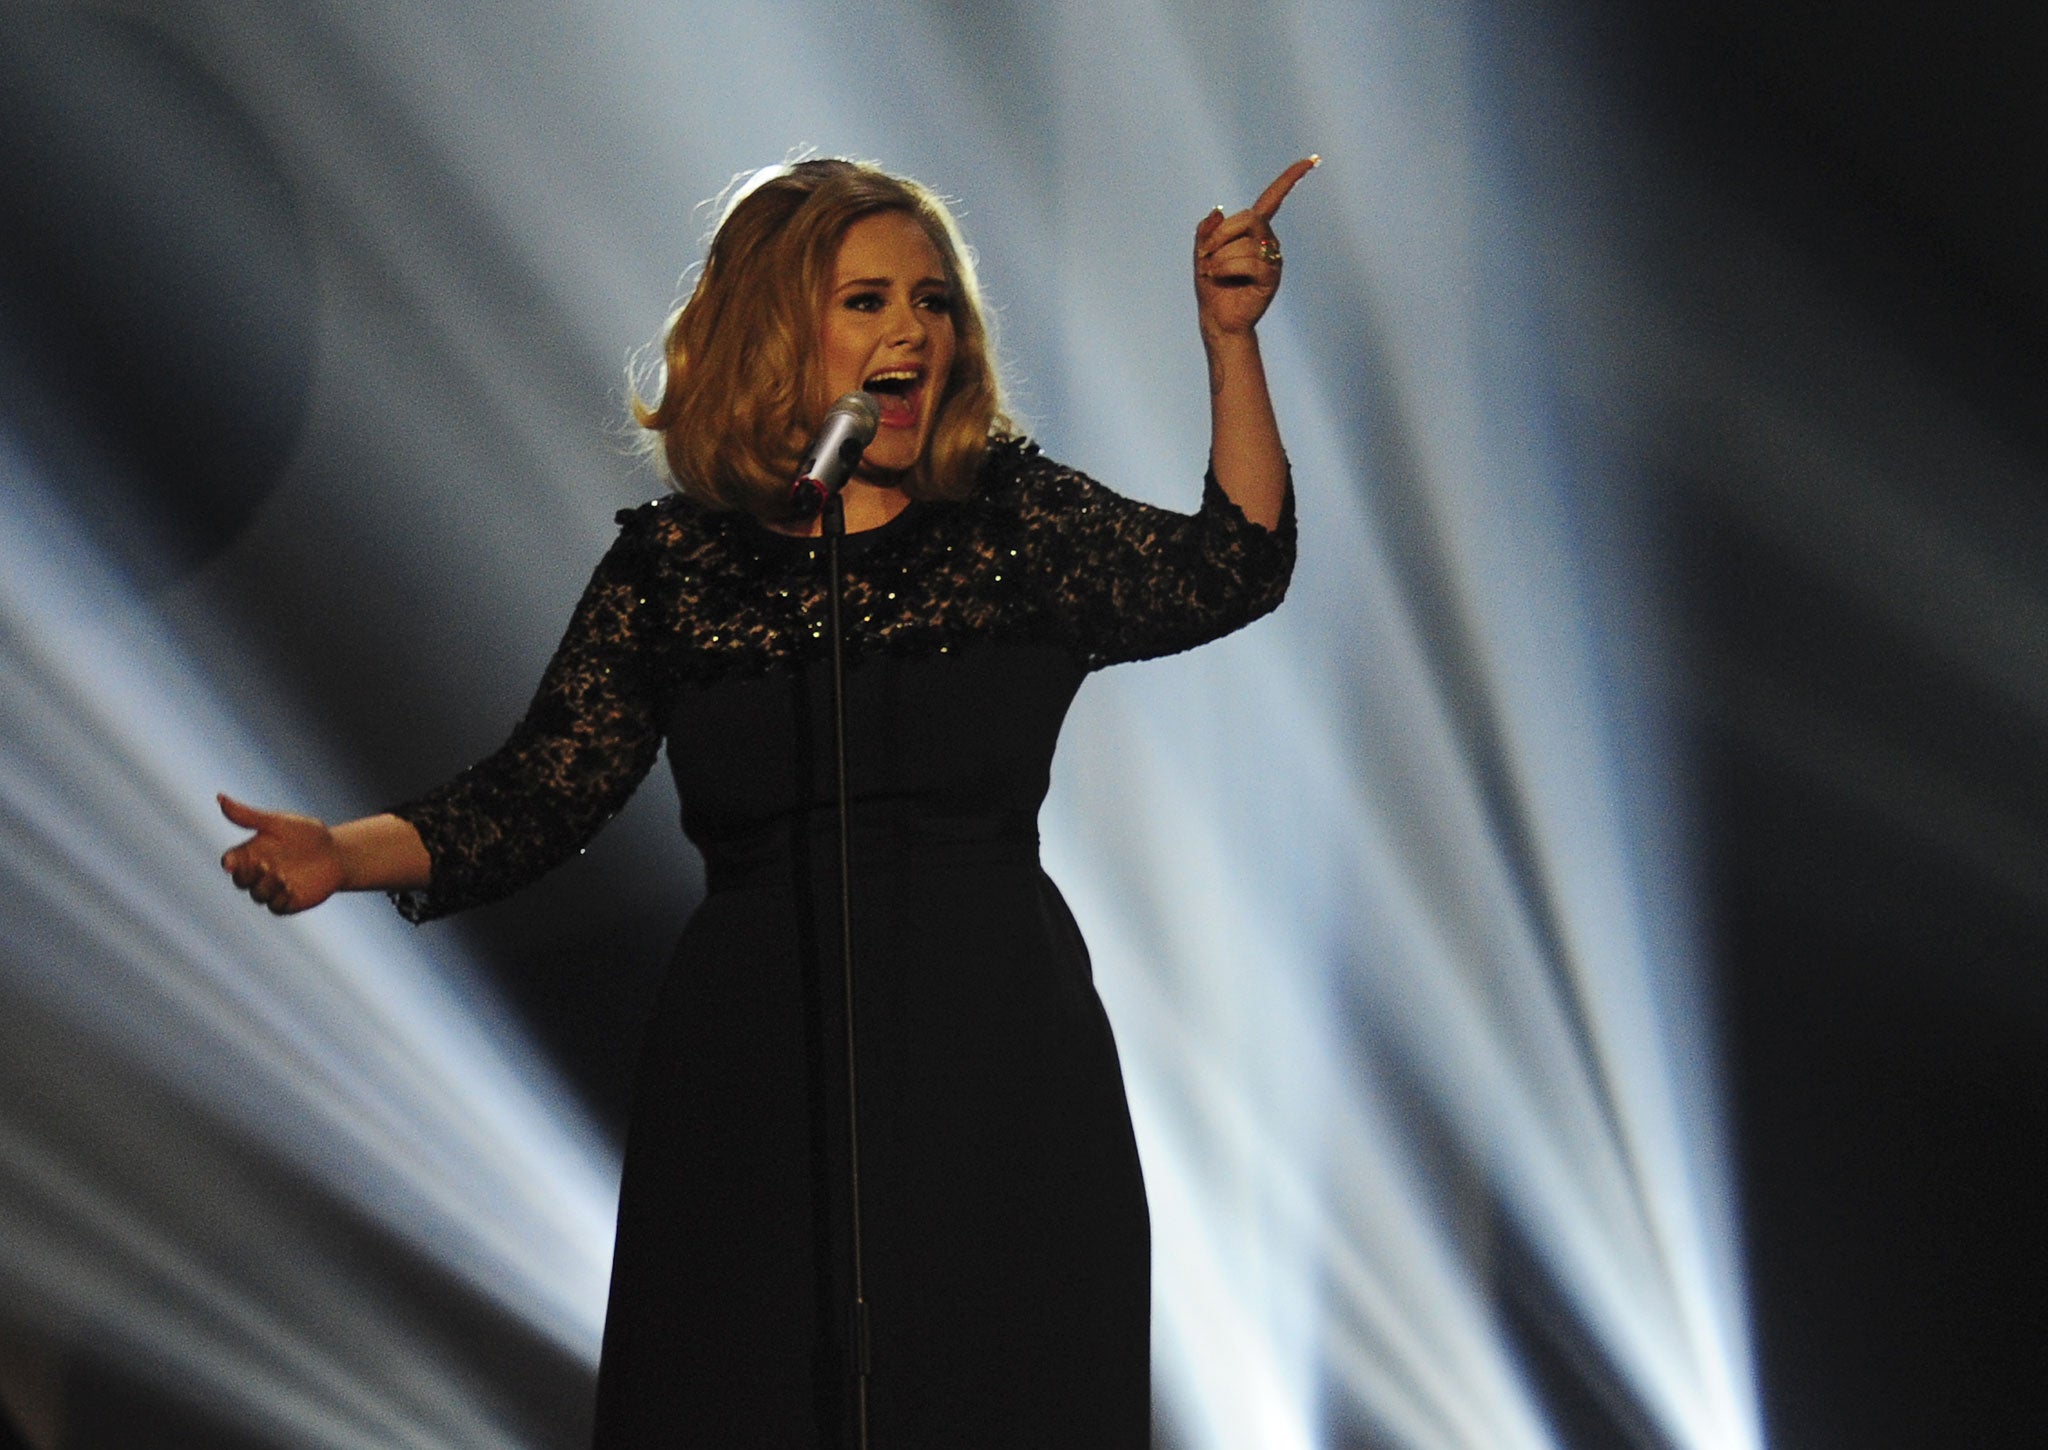 Adele performs on stage at the BRIT Awards 2012